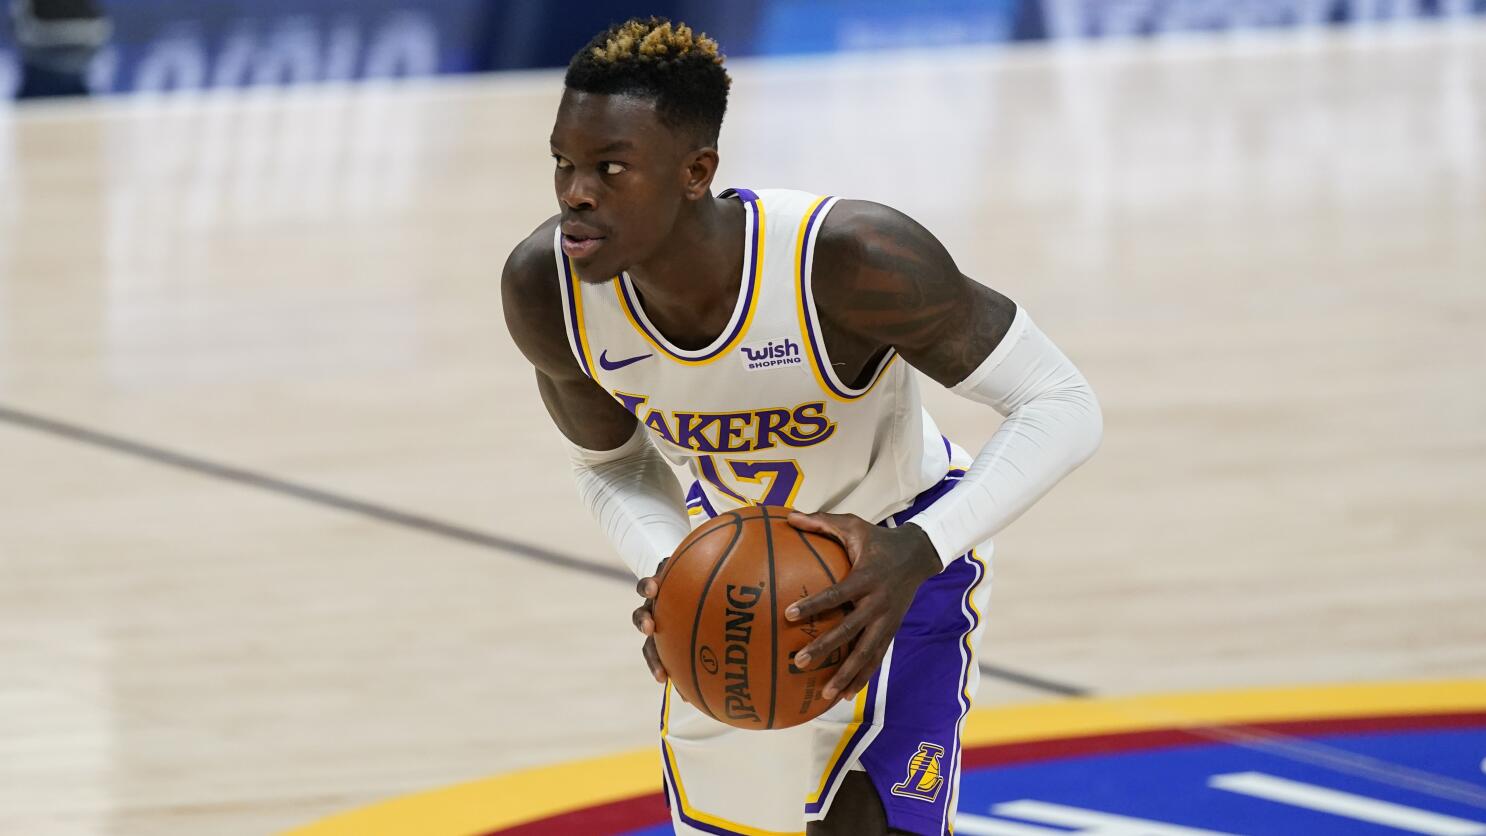 Dennis Schroder's contract situation should be lesson to future NBA players